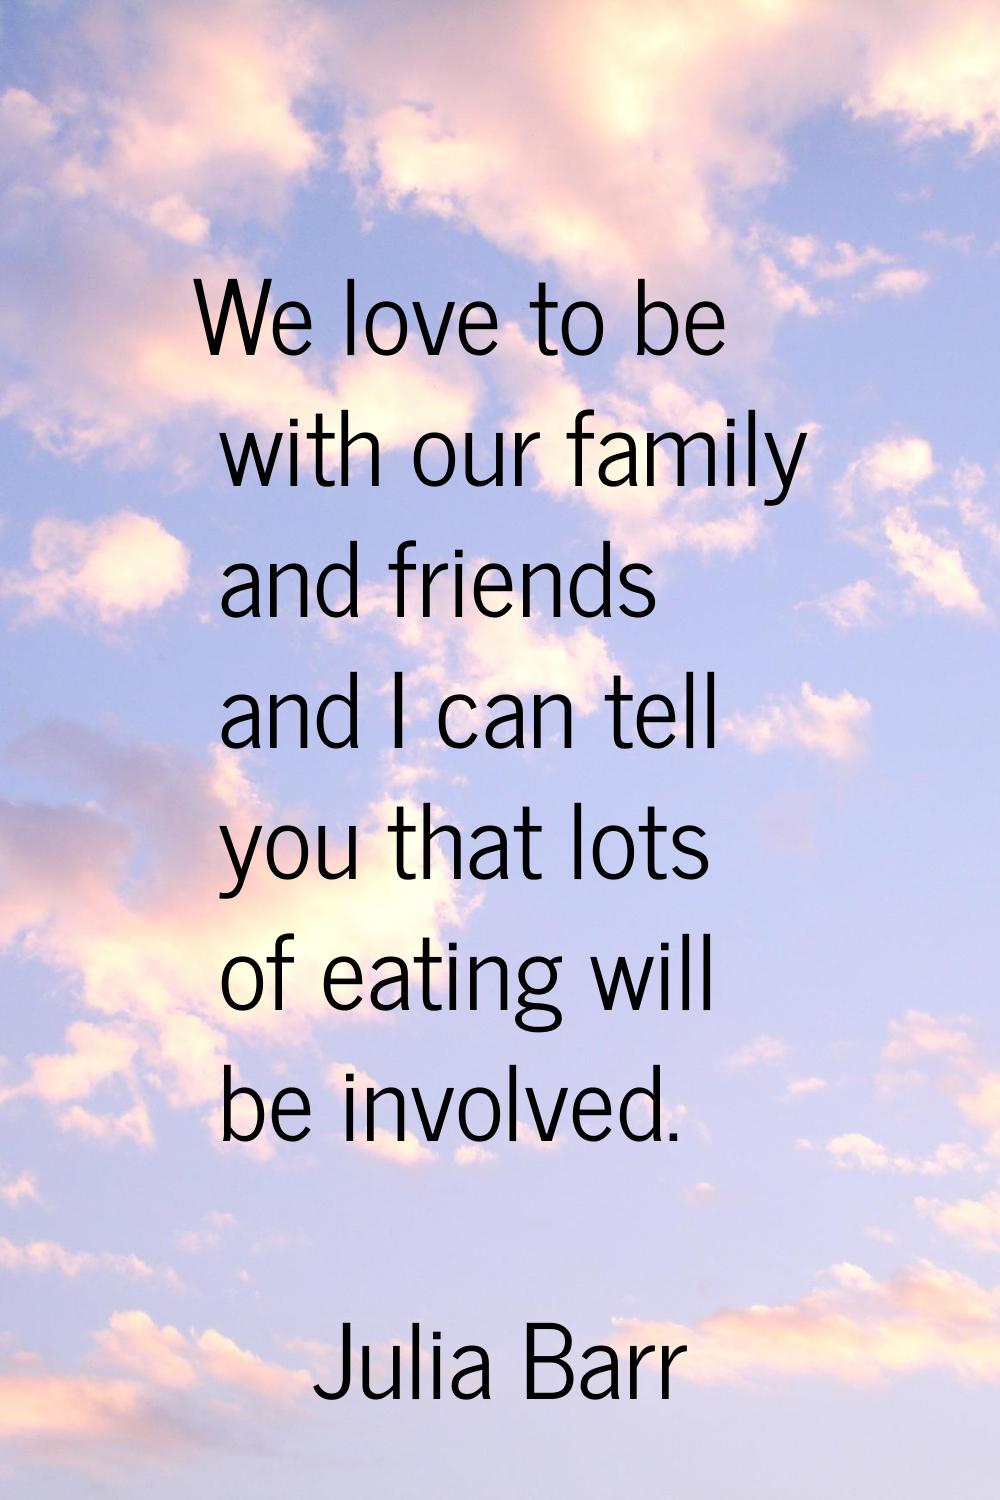 We love to be with our family and friends and I can tell you that lots of eating will be involved.